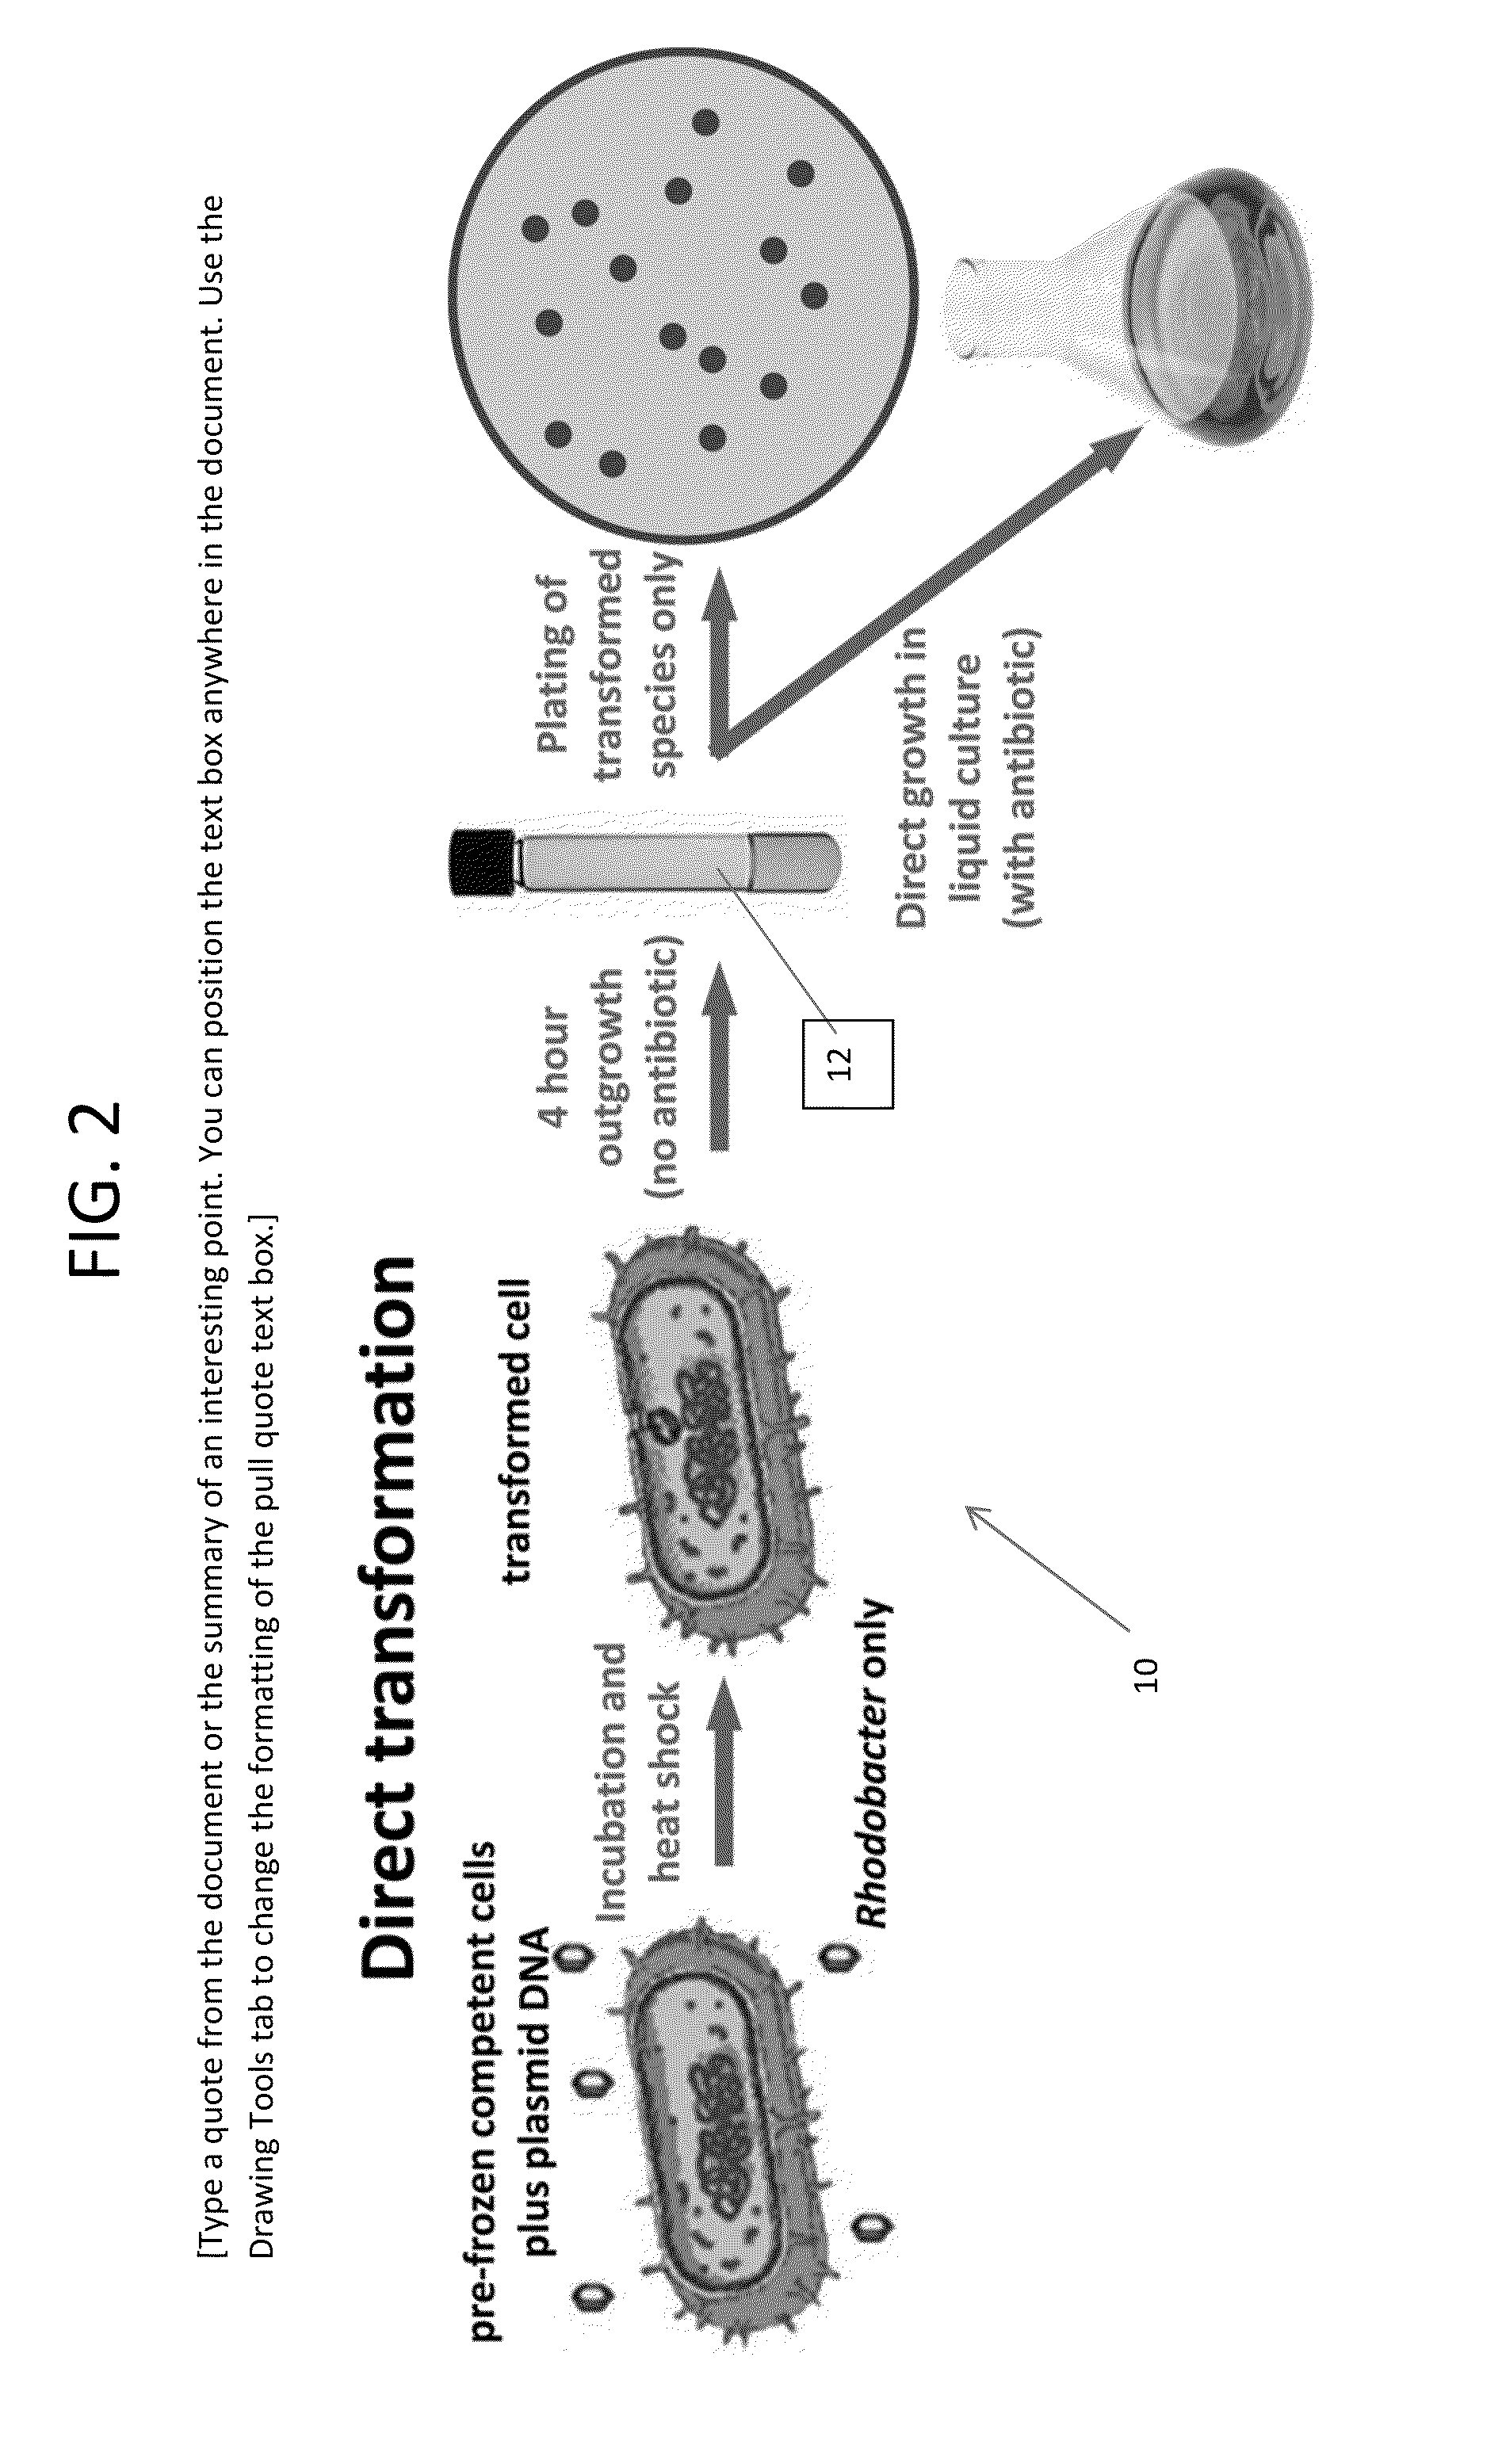 Transformable rhodobacter strains, method for producing transformable rhodobacter strains